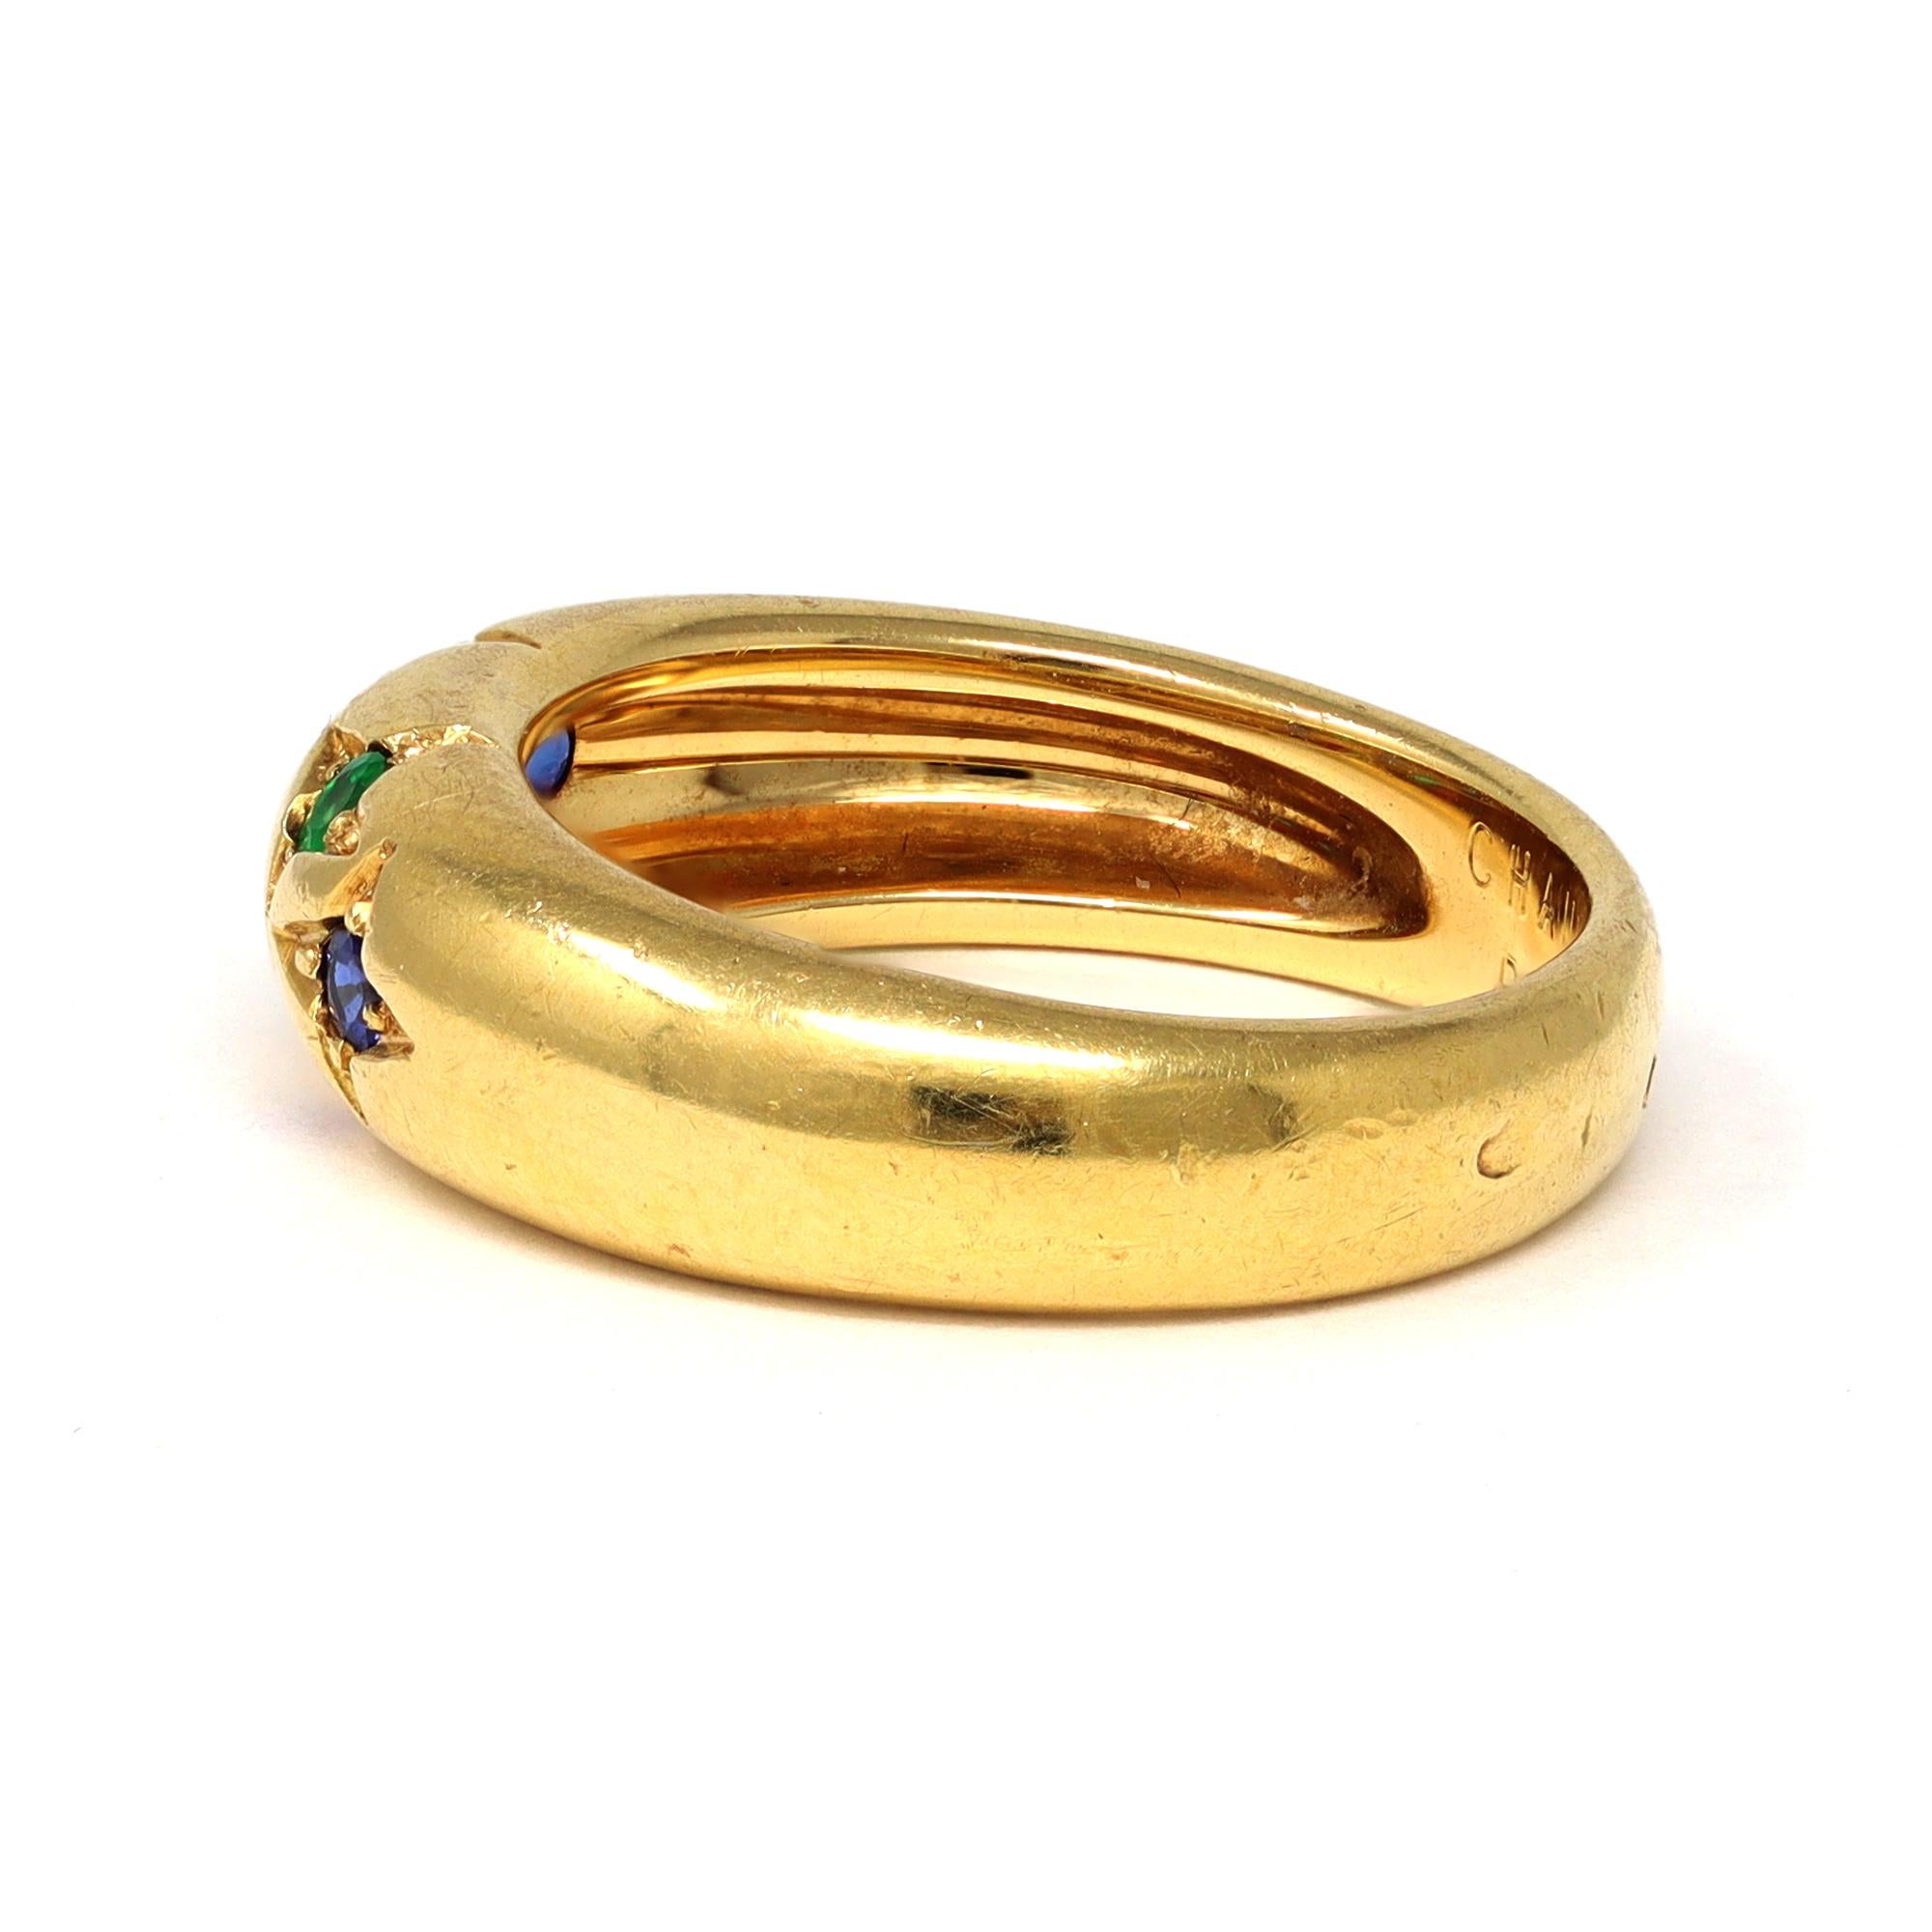 The small band ring is signed by the French house of Jewelry Chaumet Paris. It features multicolor round stones such as rubies, emeralds and sapphires of excellent quality and saturation. The ring is made in 18 karat yellow gold and has a gross